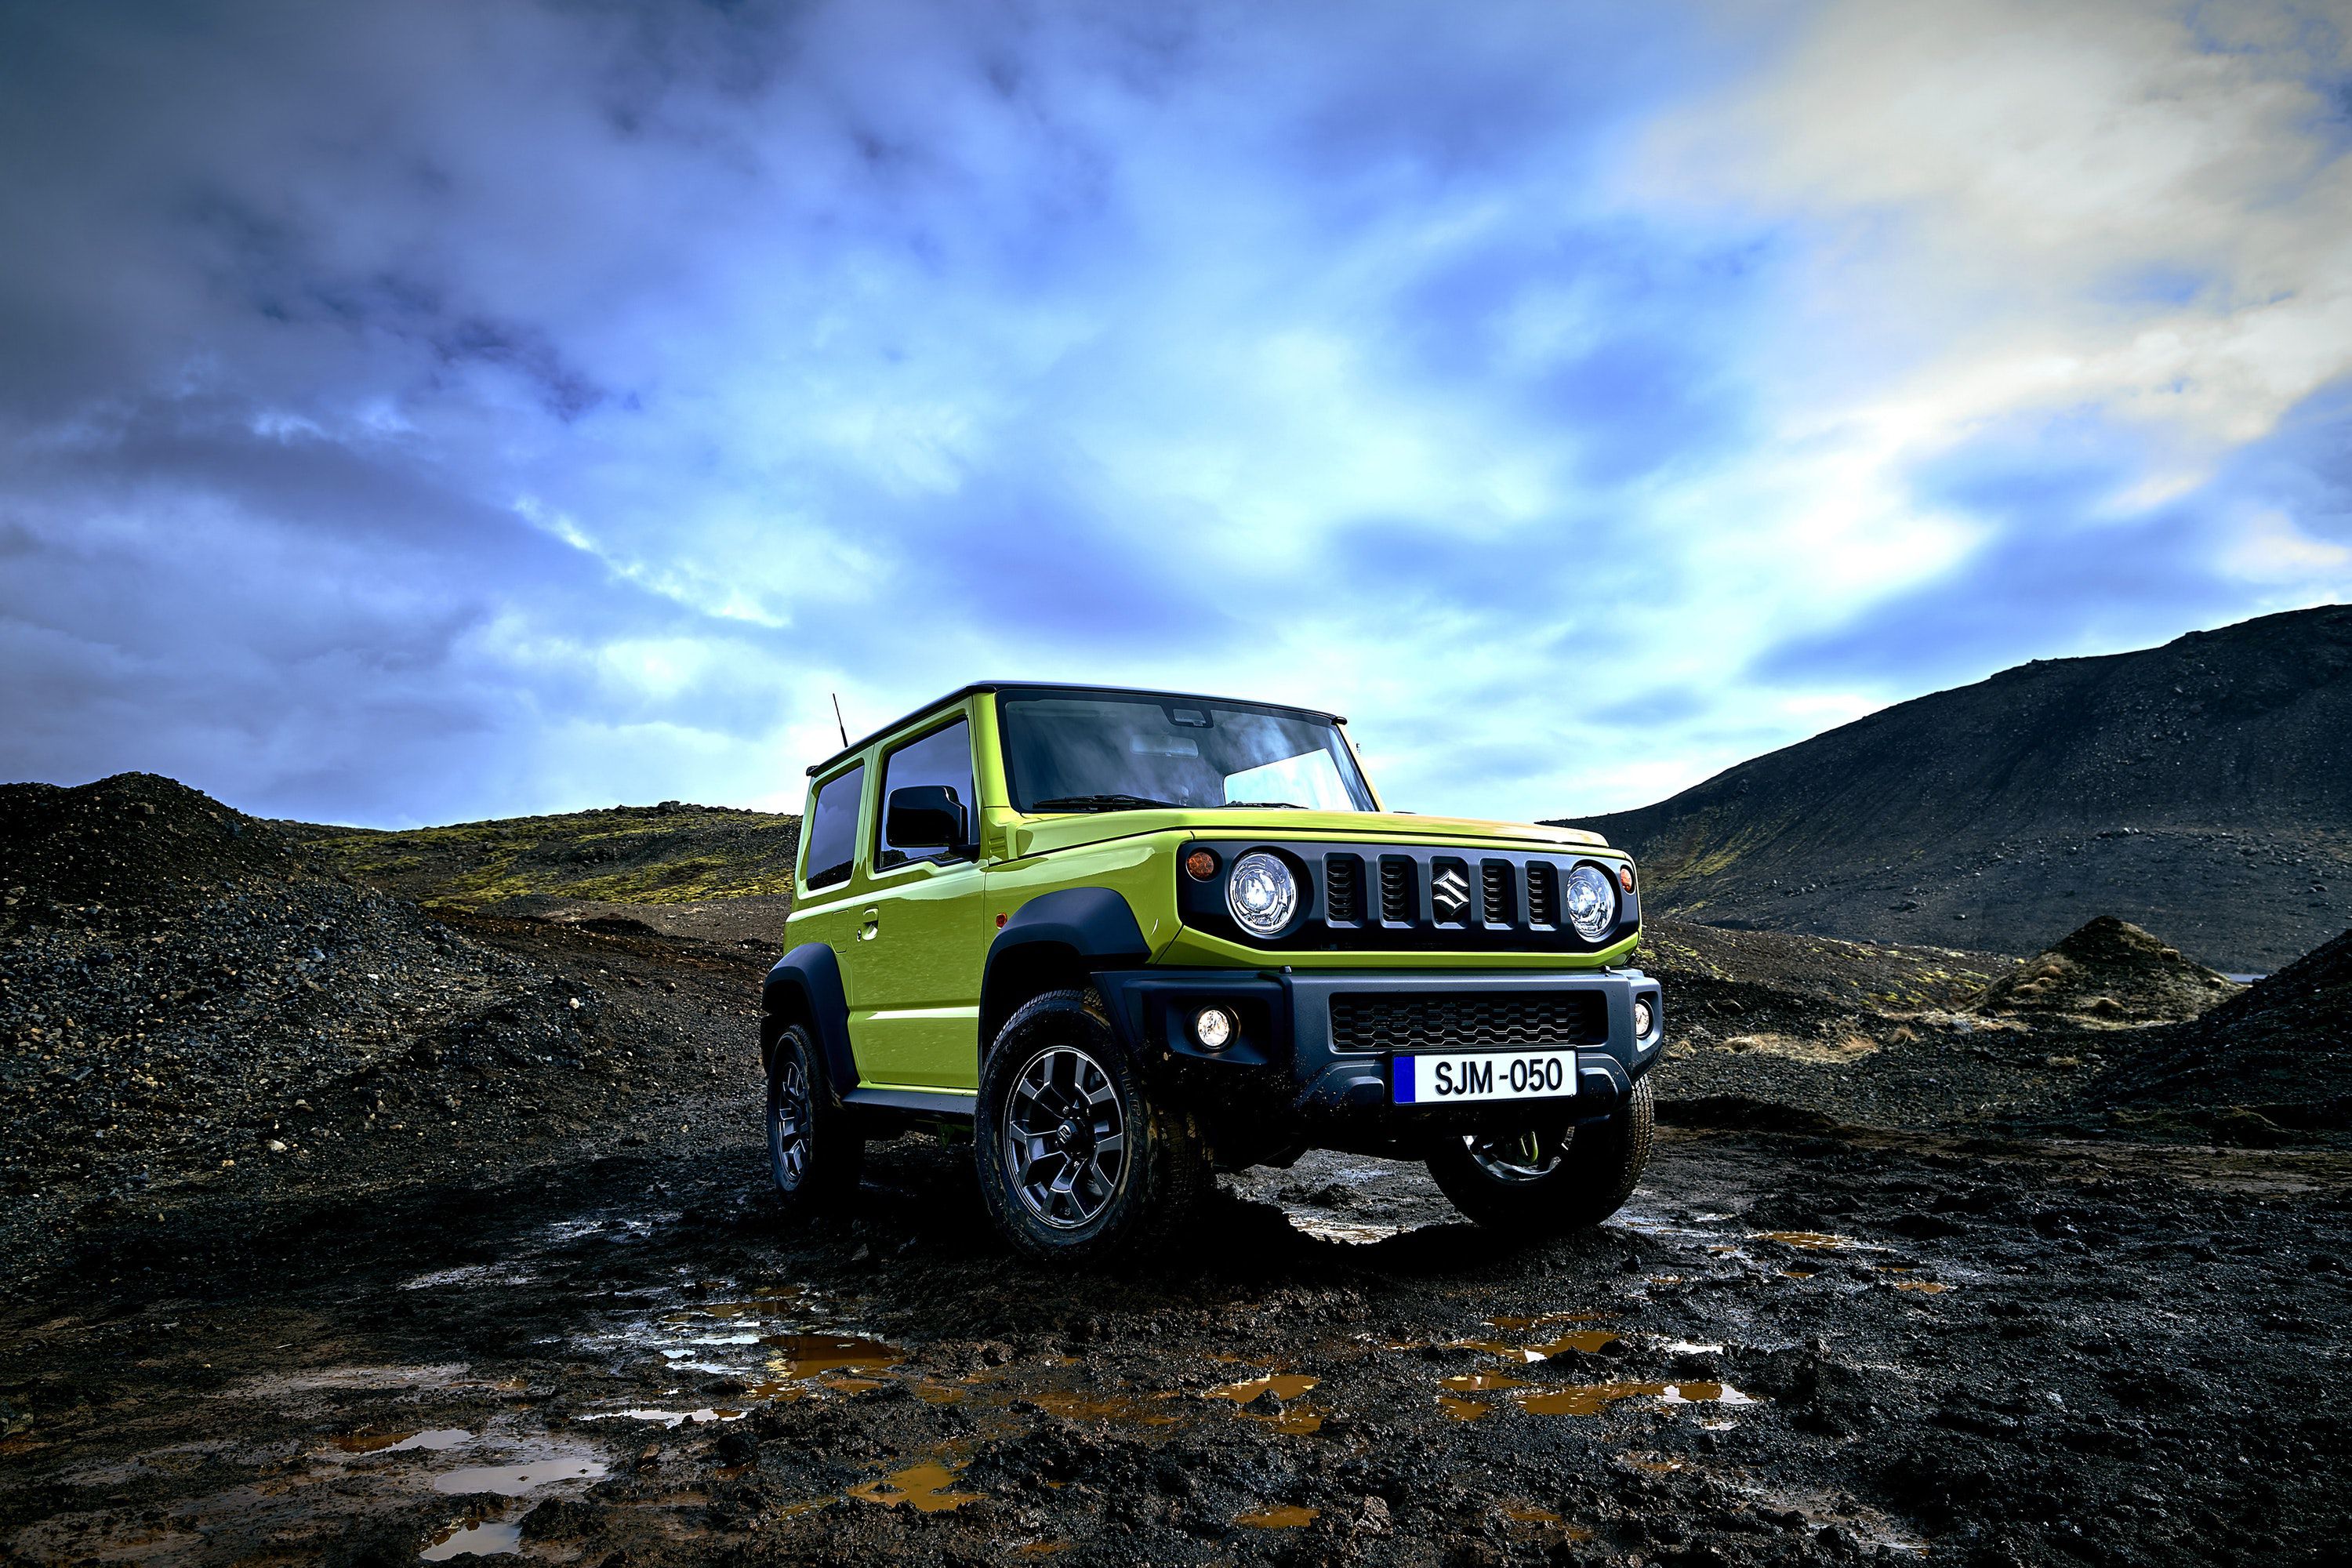 Lime green Suzuki Jimny parked on top of a rocky mountain